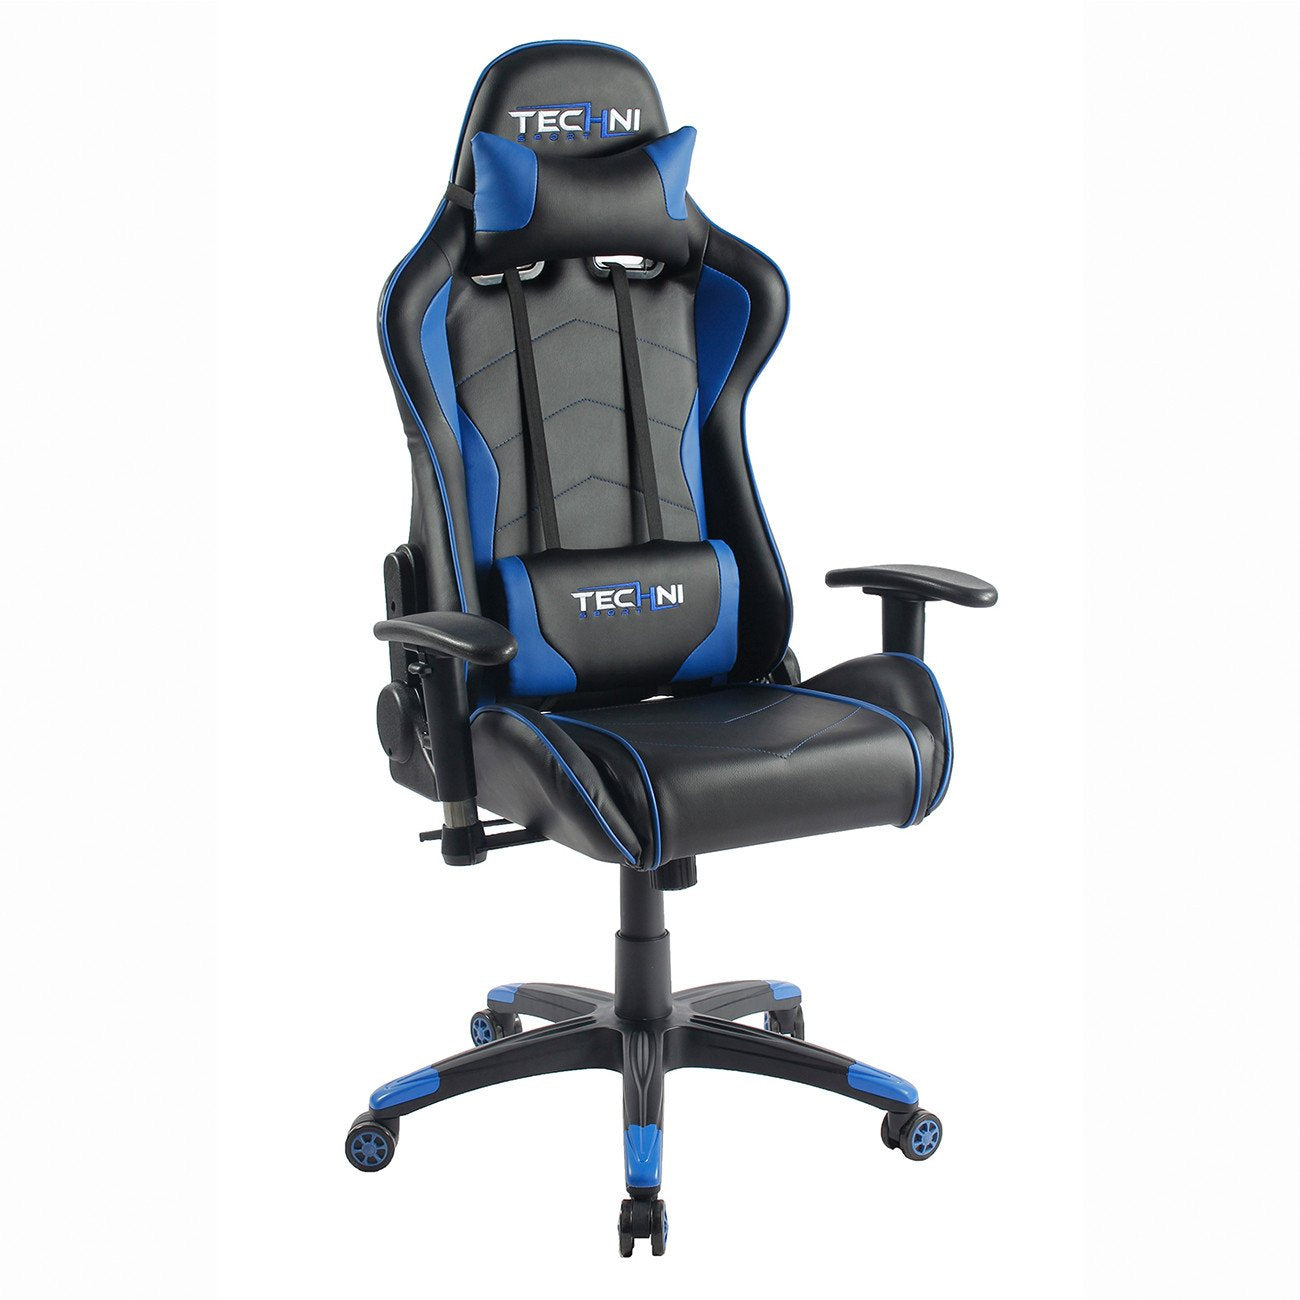 Techni Sport Rta-ts48-bl Office-pc Gaming Chair. Color: Blue